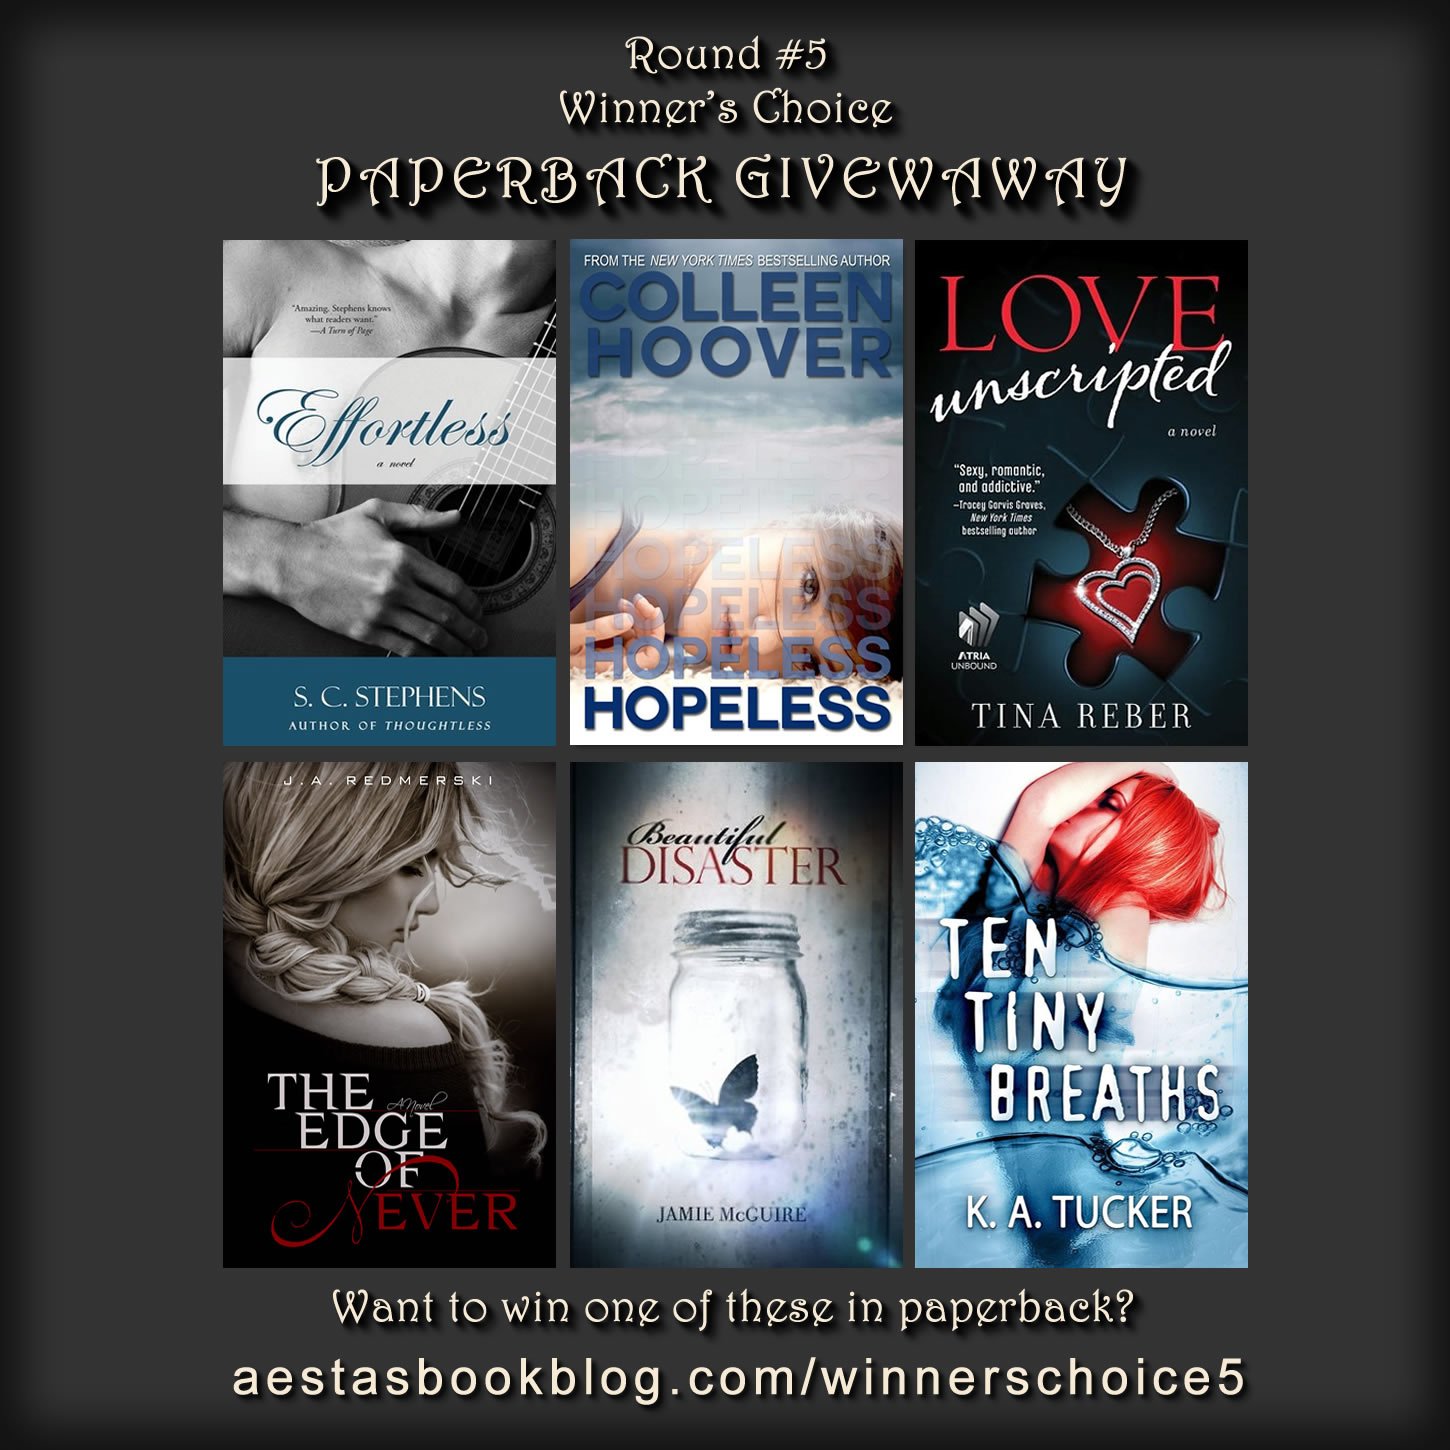 WINNER’S CHOICE PAPERBACK GIVEAWAY: Round #5